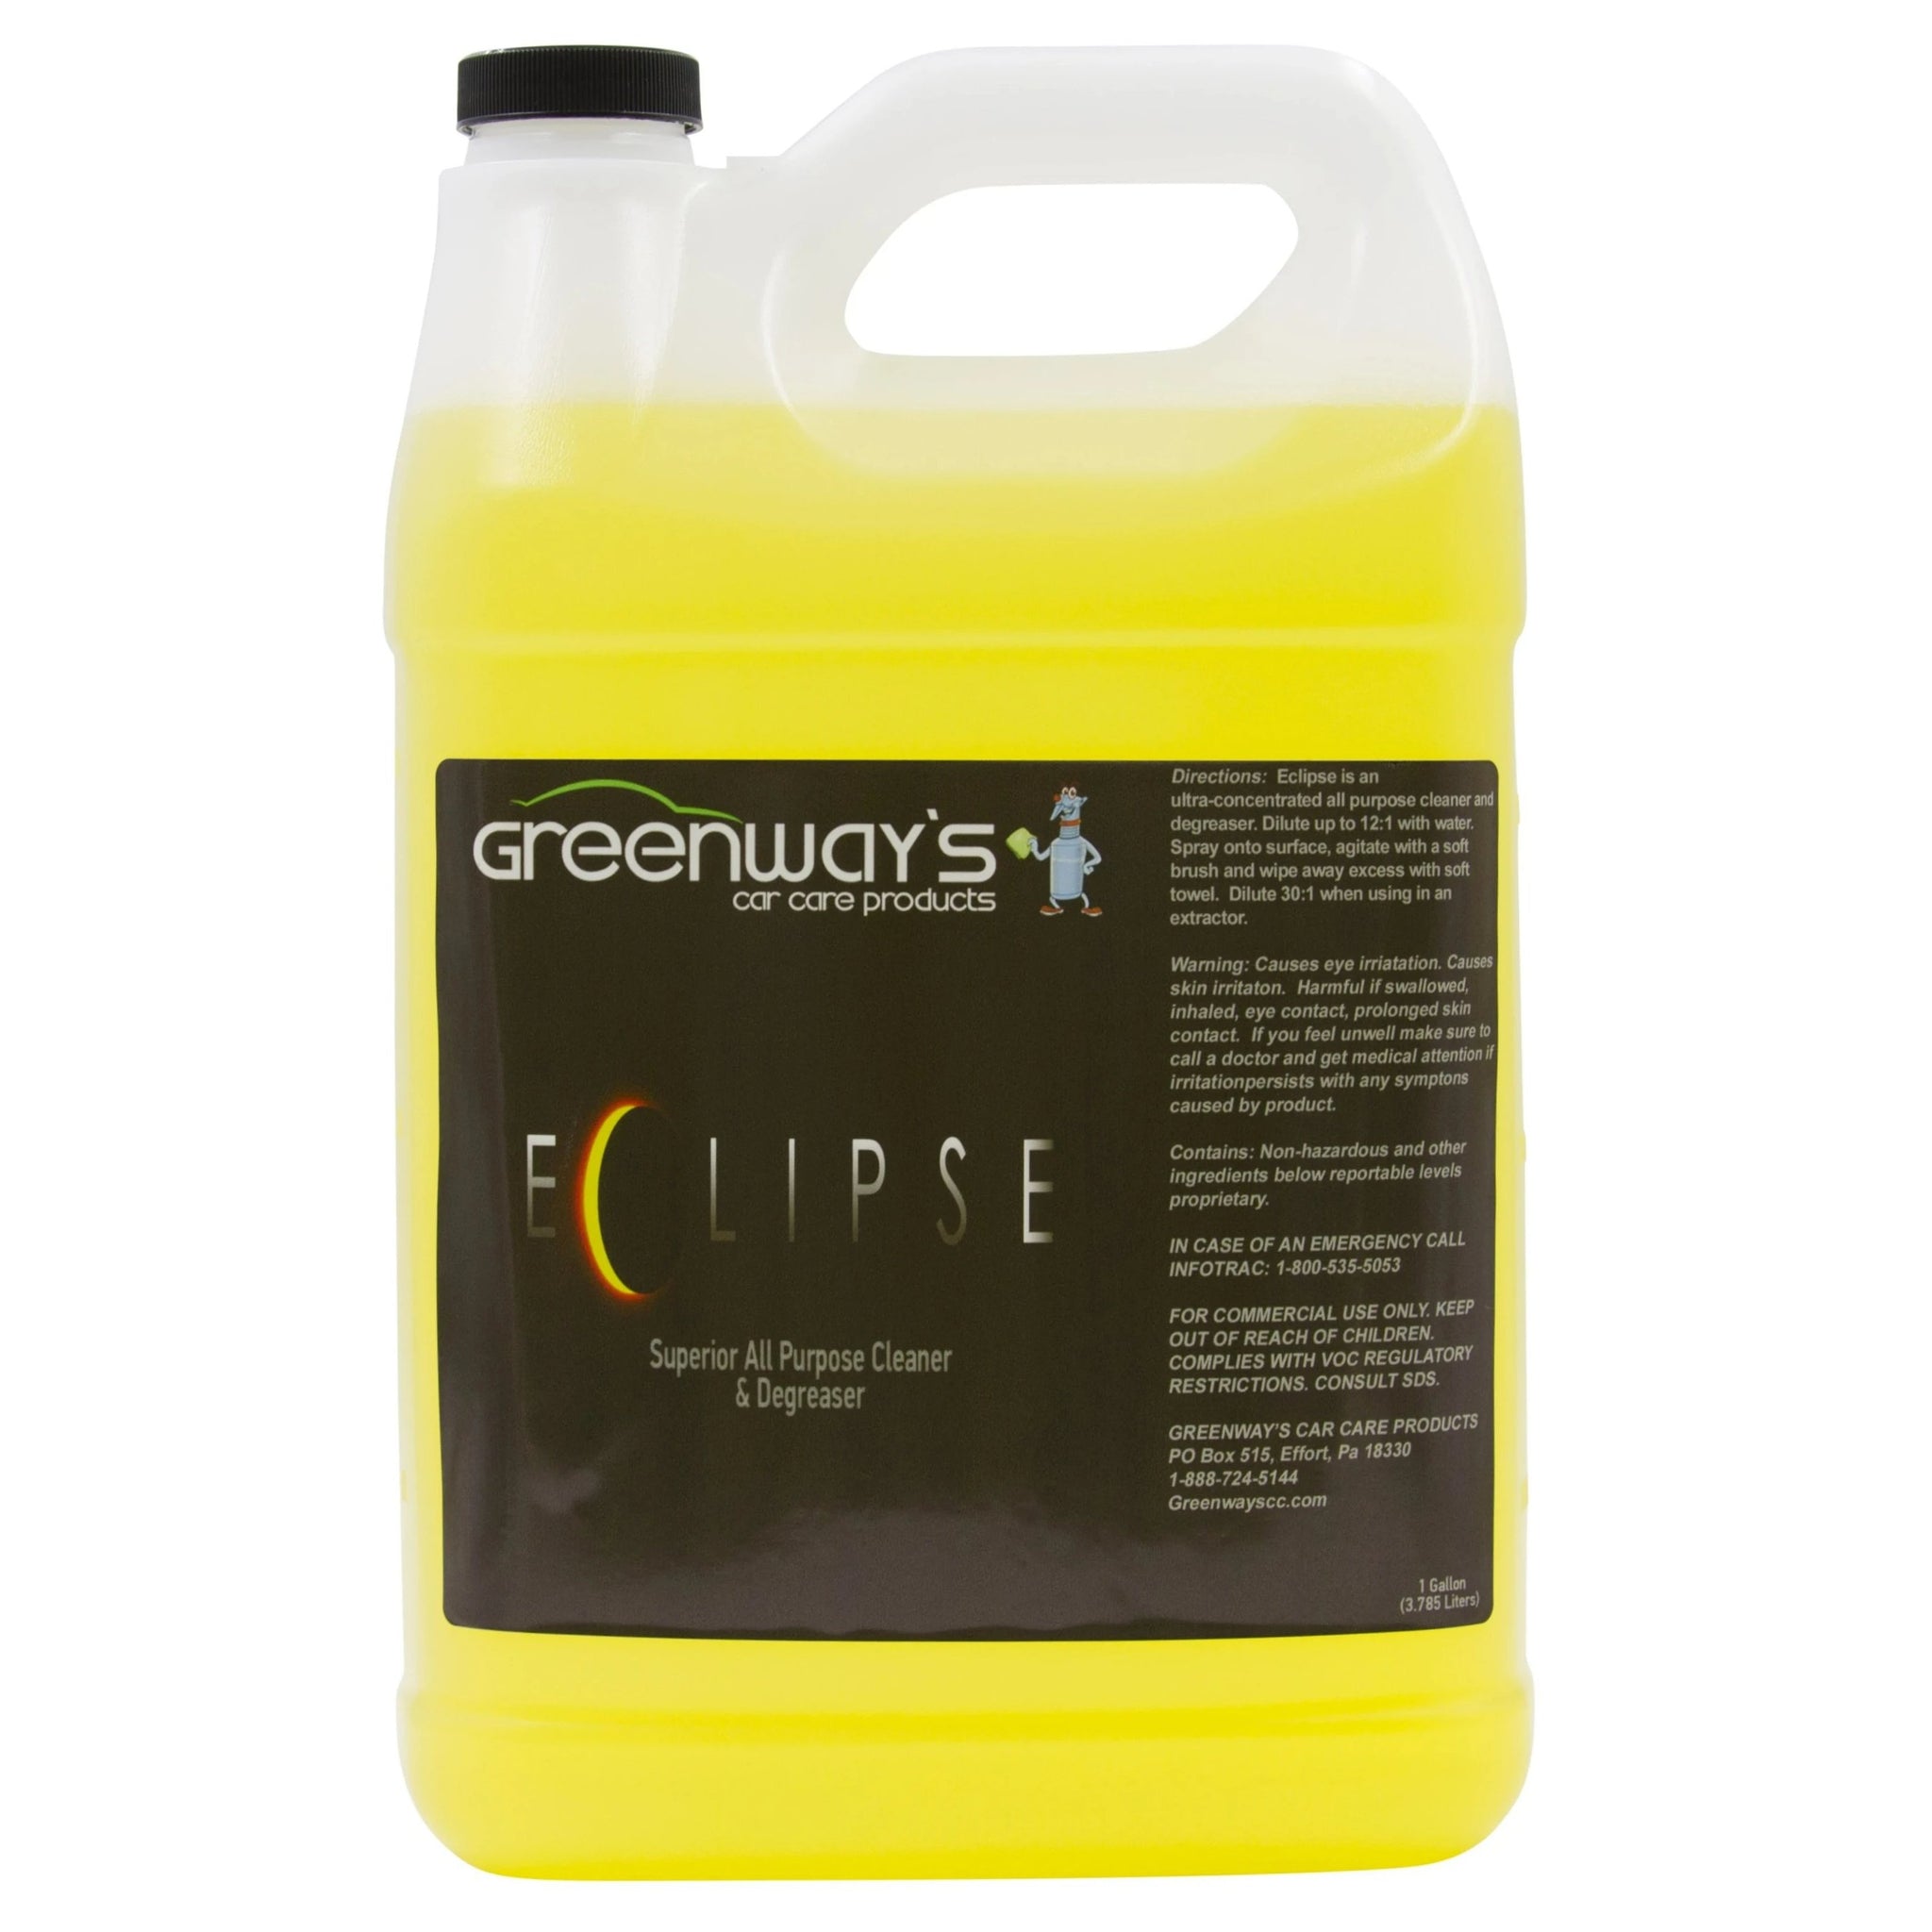 Greenway’s Eclipse, spray and wipe, dual-action all-purpose cleaner, degreaser, free rinsing, optic brighteners, 1 gallon.